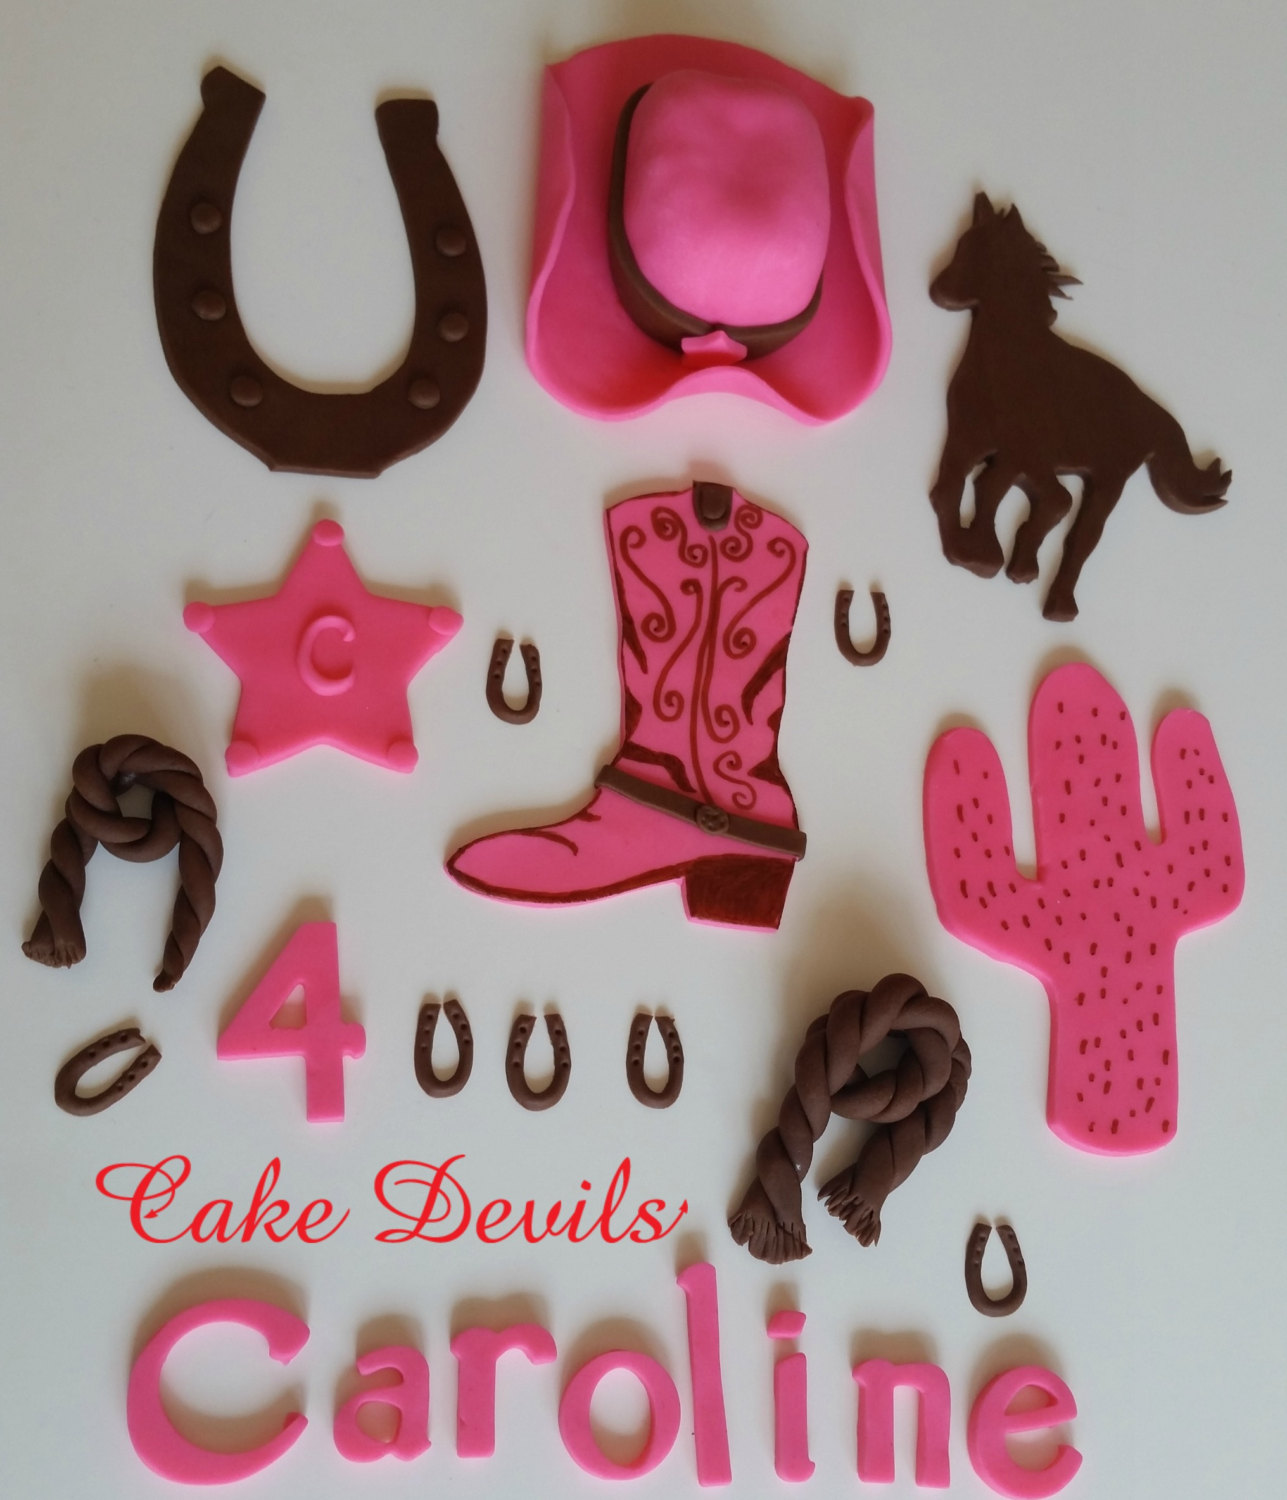 61 Pcs Cowgirl Cake Toppers Set Pink Western Cowgirl Cake Picks Horse Boot Hat Cactus Mexican Theme Cake Decorations Glitter Western Cowgirl Theme Party Decorations for Baby Shower Birthday Party 